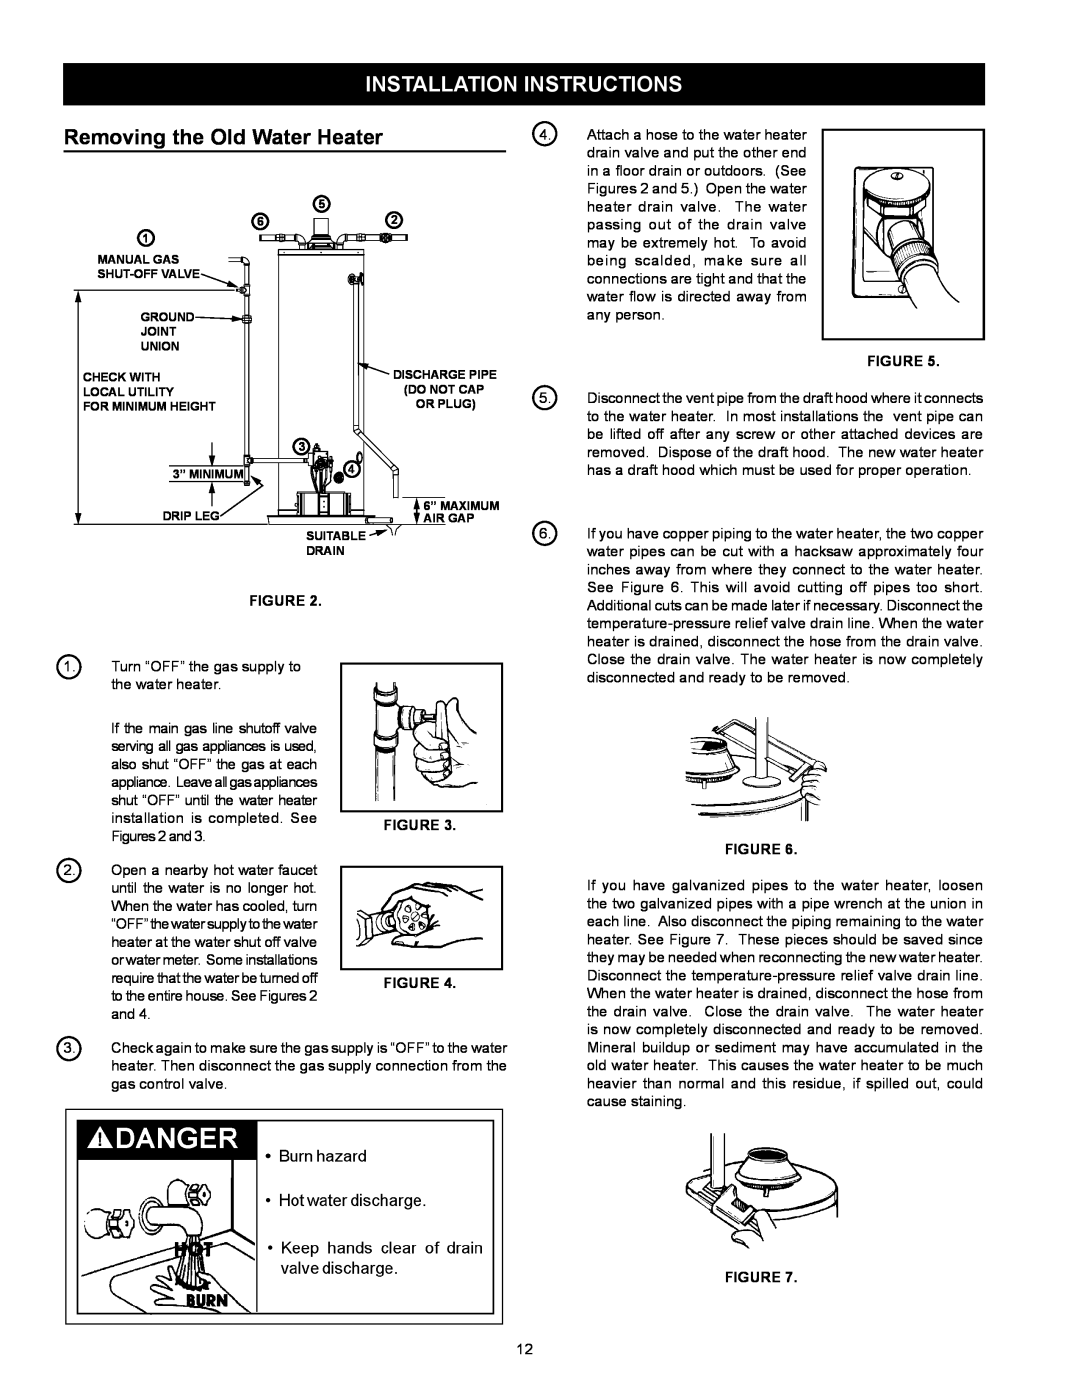 Kenmore 153.332.410 manual Installation Instructions, Removing the Old Water Heater 